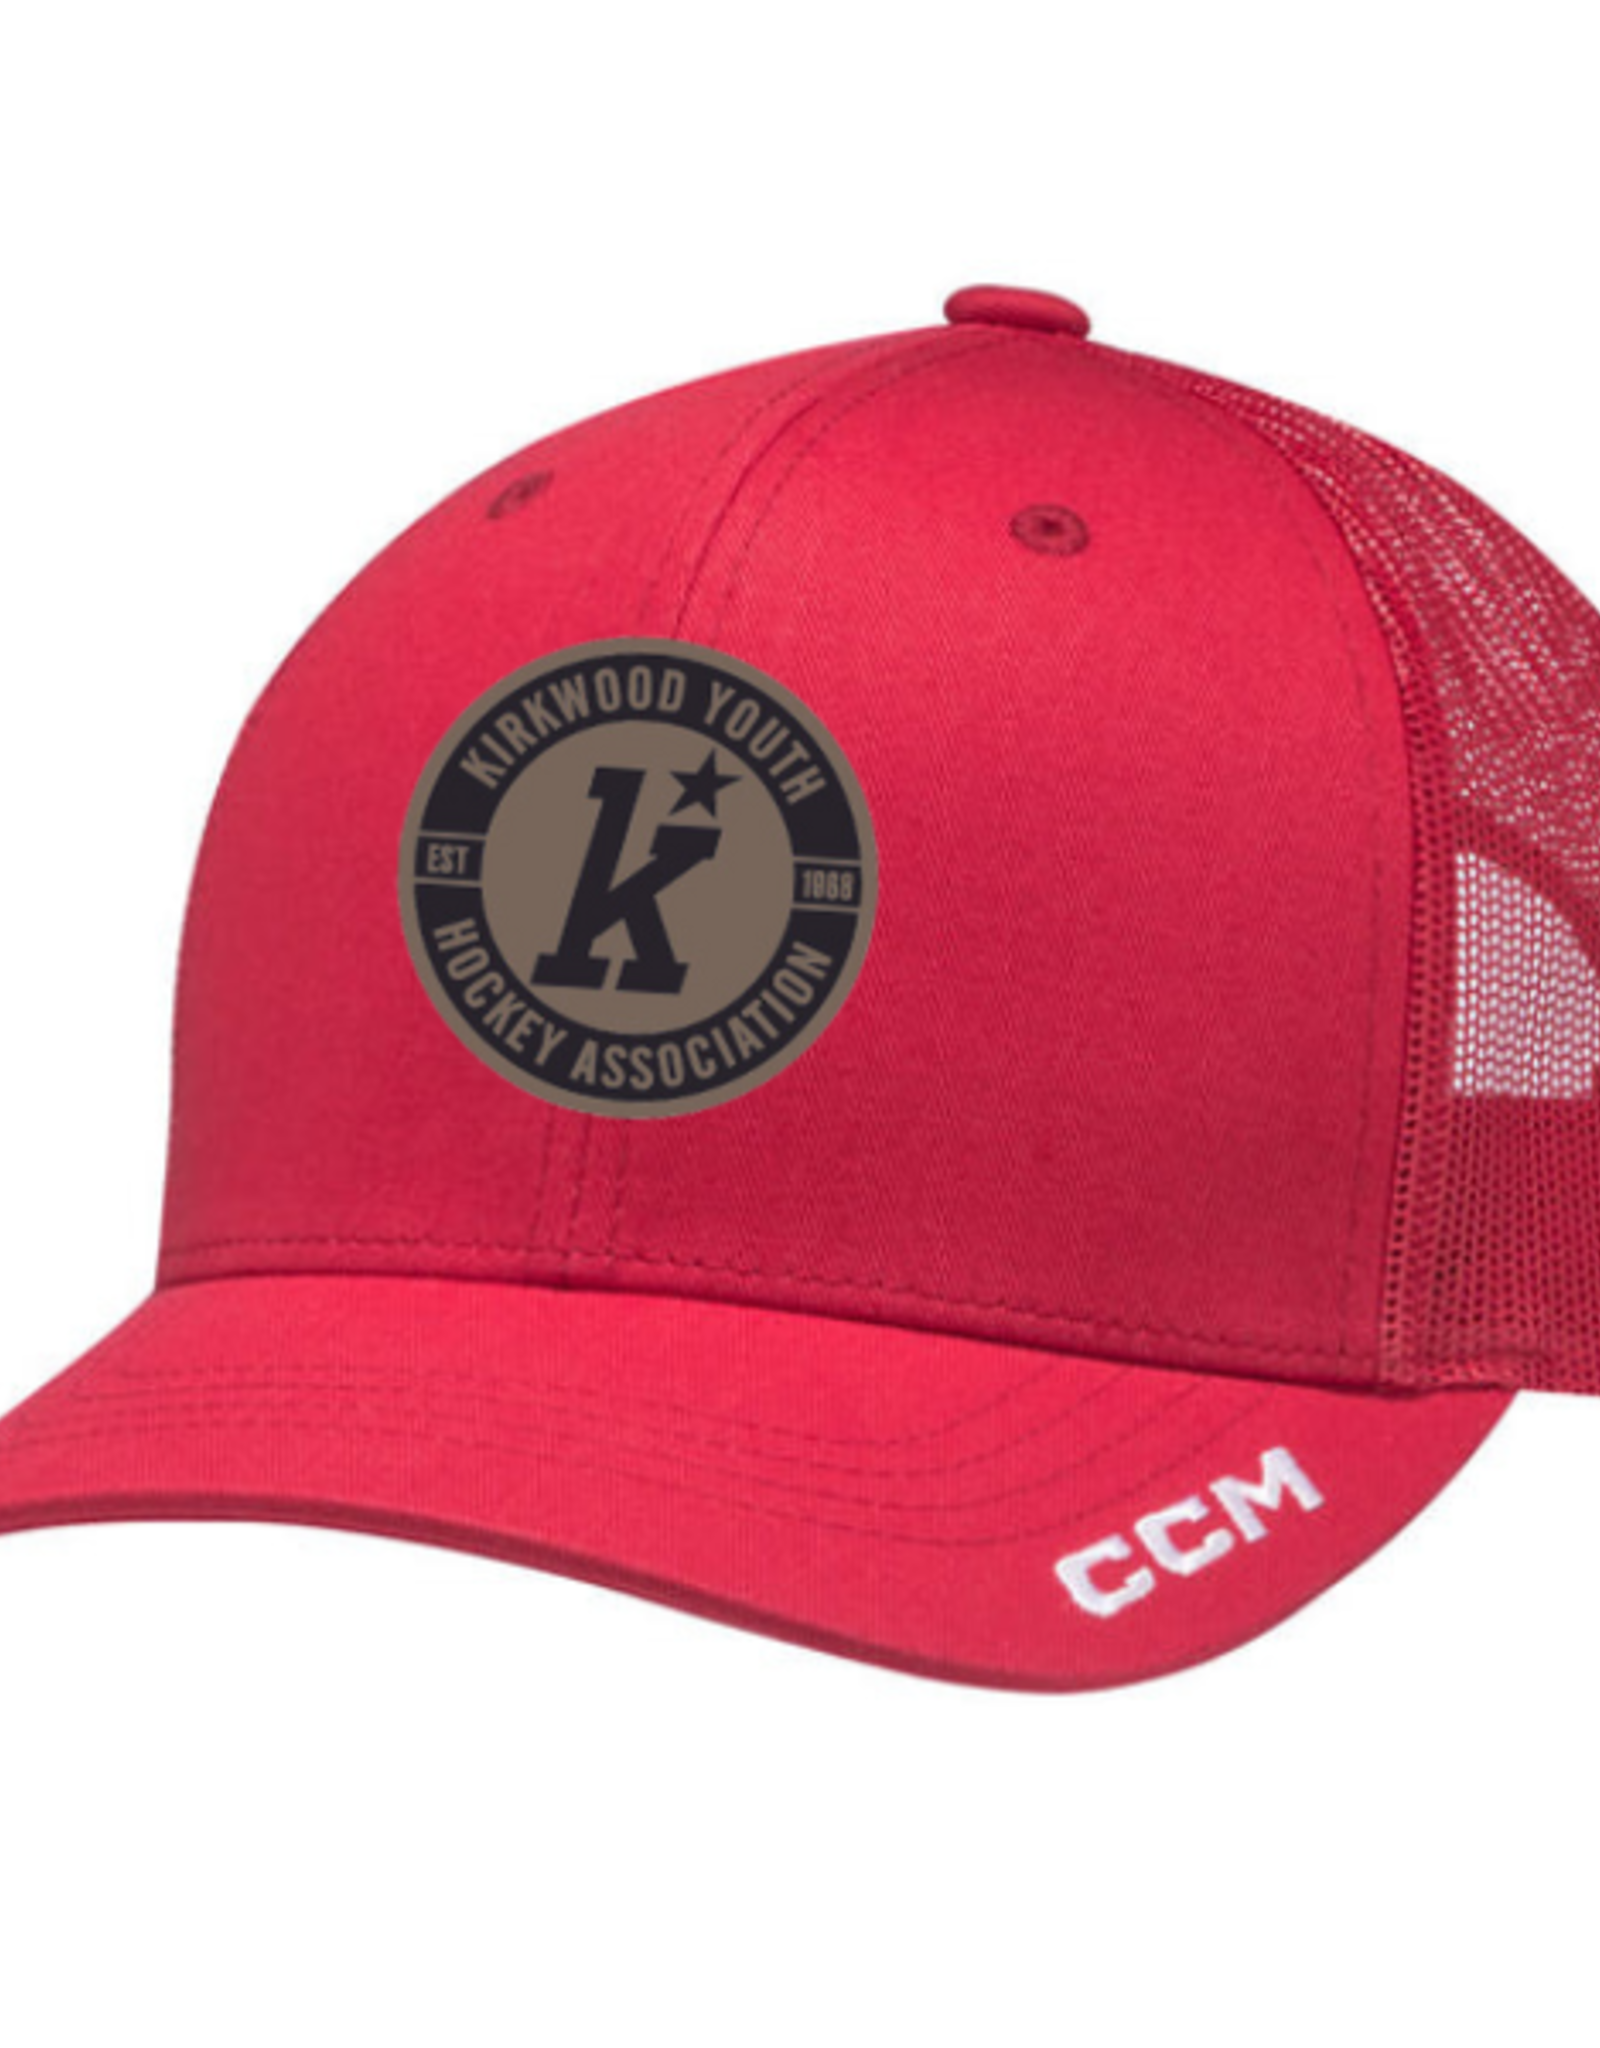 CCM Kirkwood CCM Trucker Hat (Leather Patch) YOUTH Red